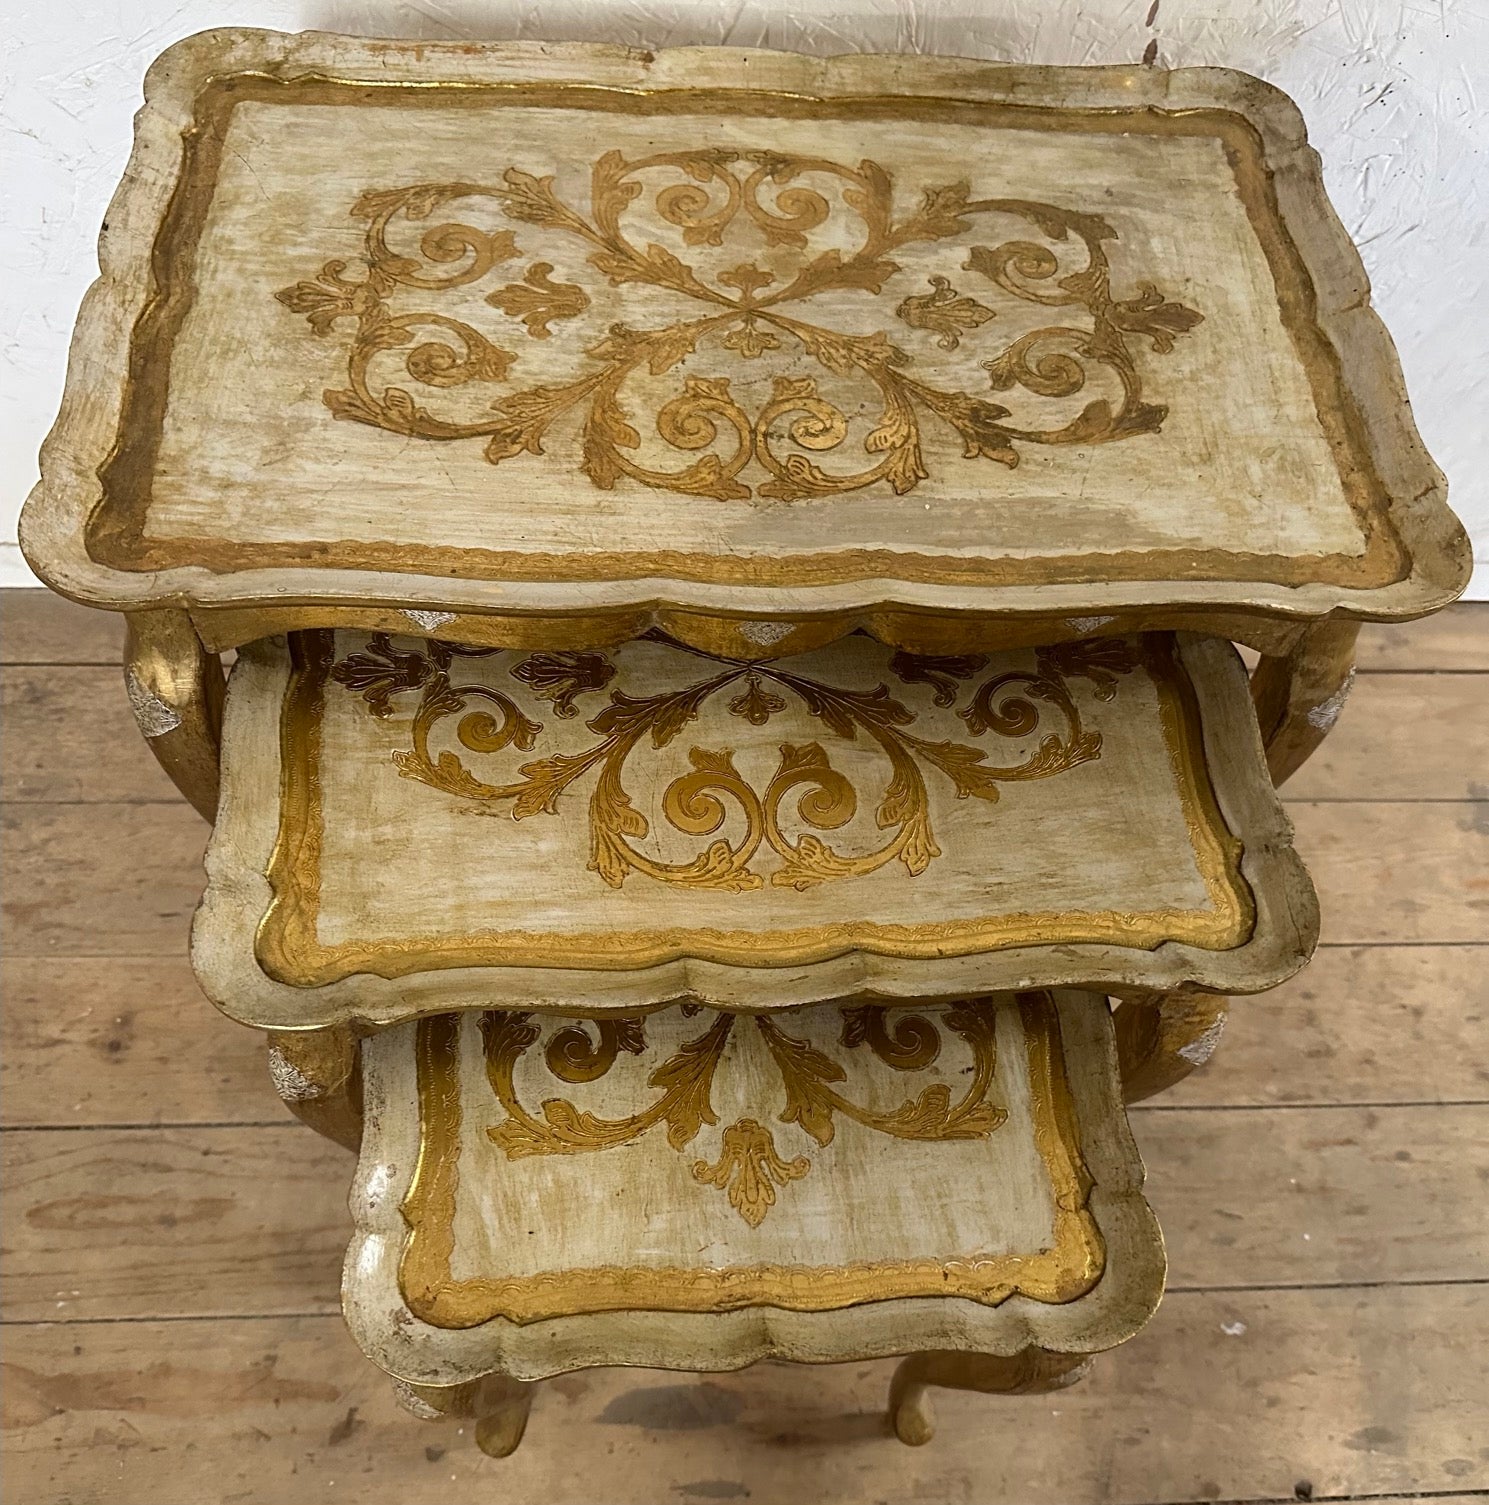 Set of three Florentine-style stacking tables featuring cabriole legs with intricate hand painted details on the tabletops and scalloped edges. The tables have been lovingly restored to its original condition but careful to retain the beautifully